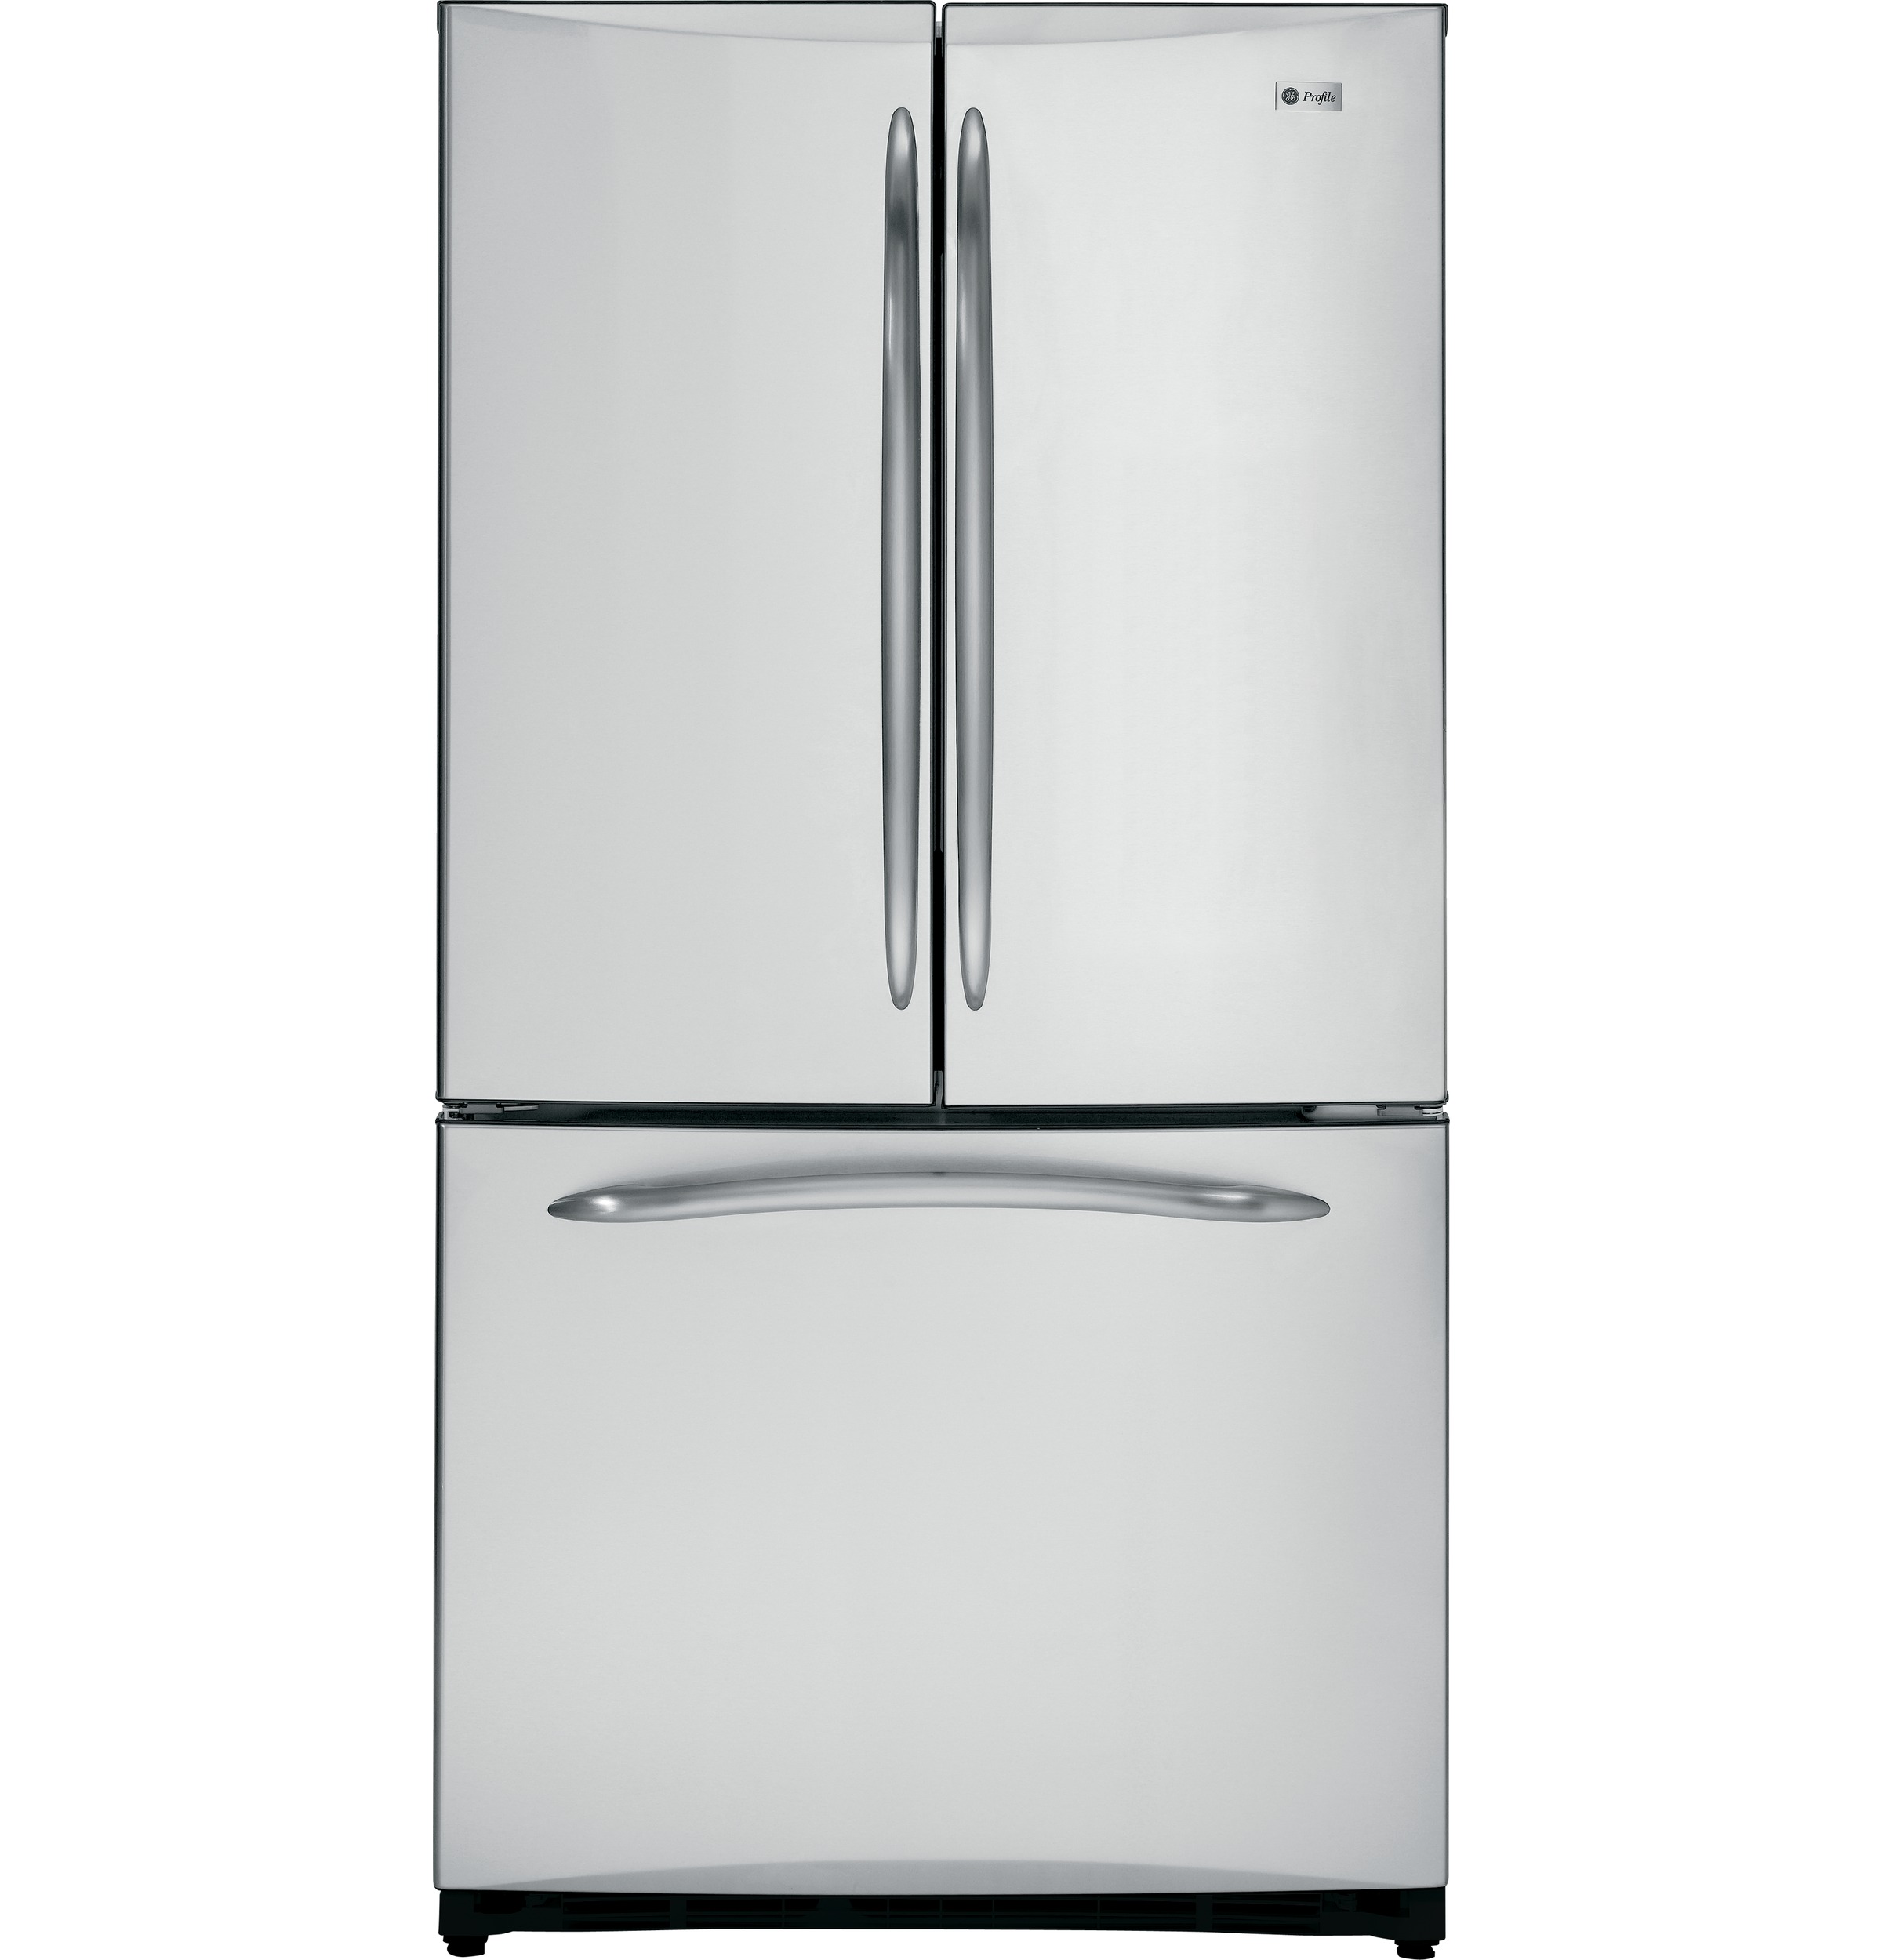 GE Profile™ Series 20.7 Cu. Ft. Counter-Depth French-Door Refrigerator with Icemaker